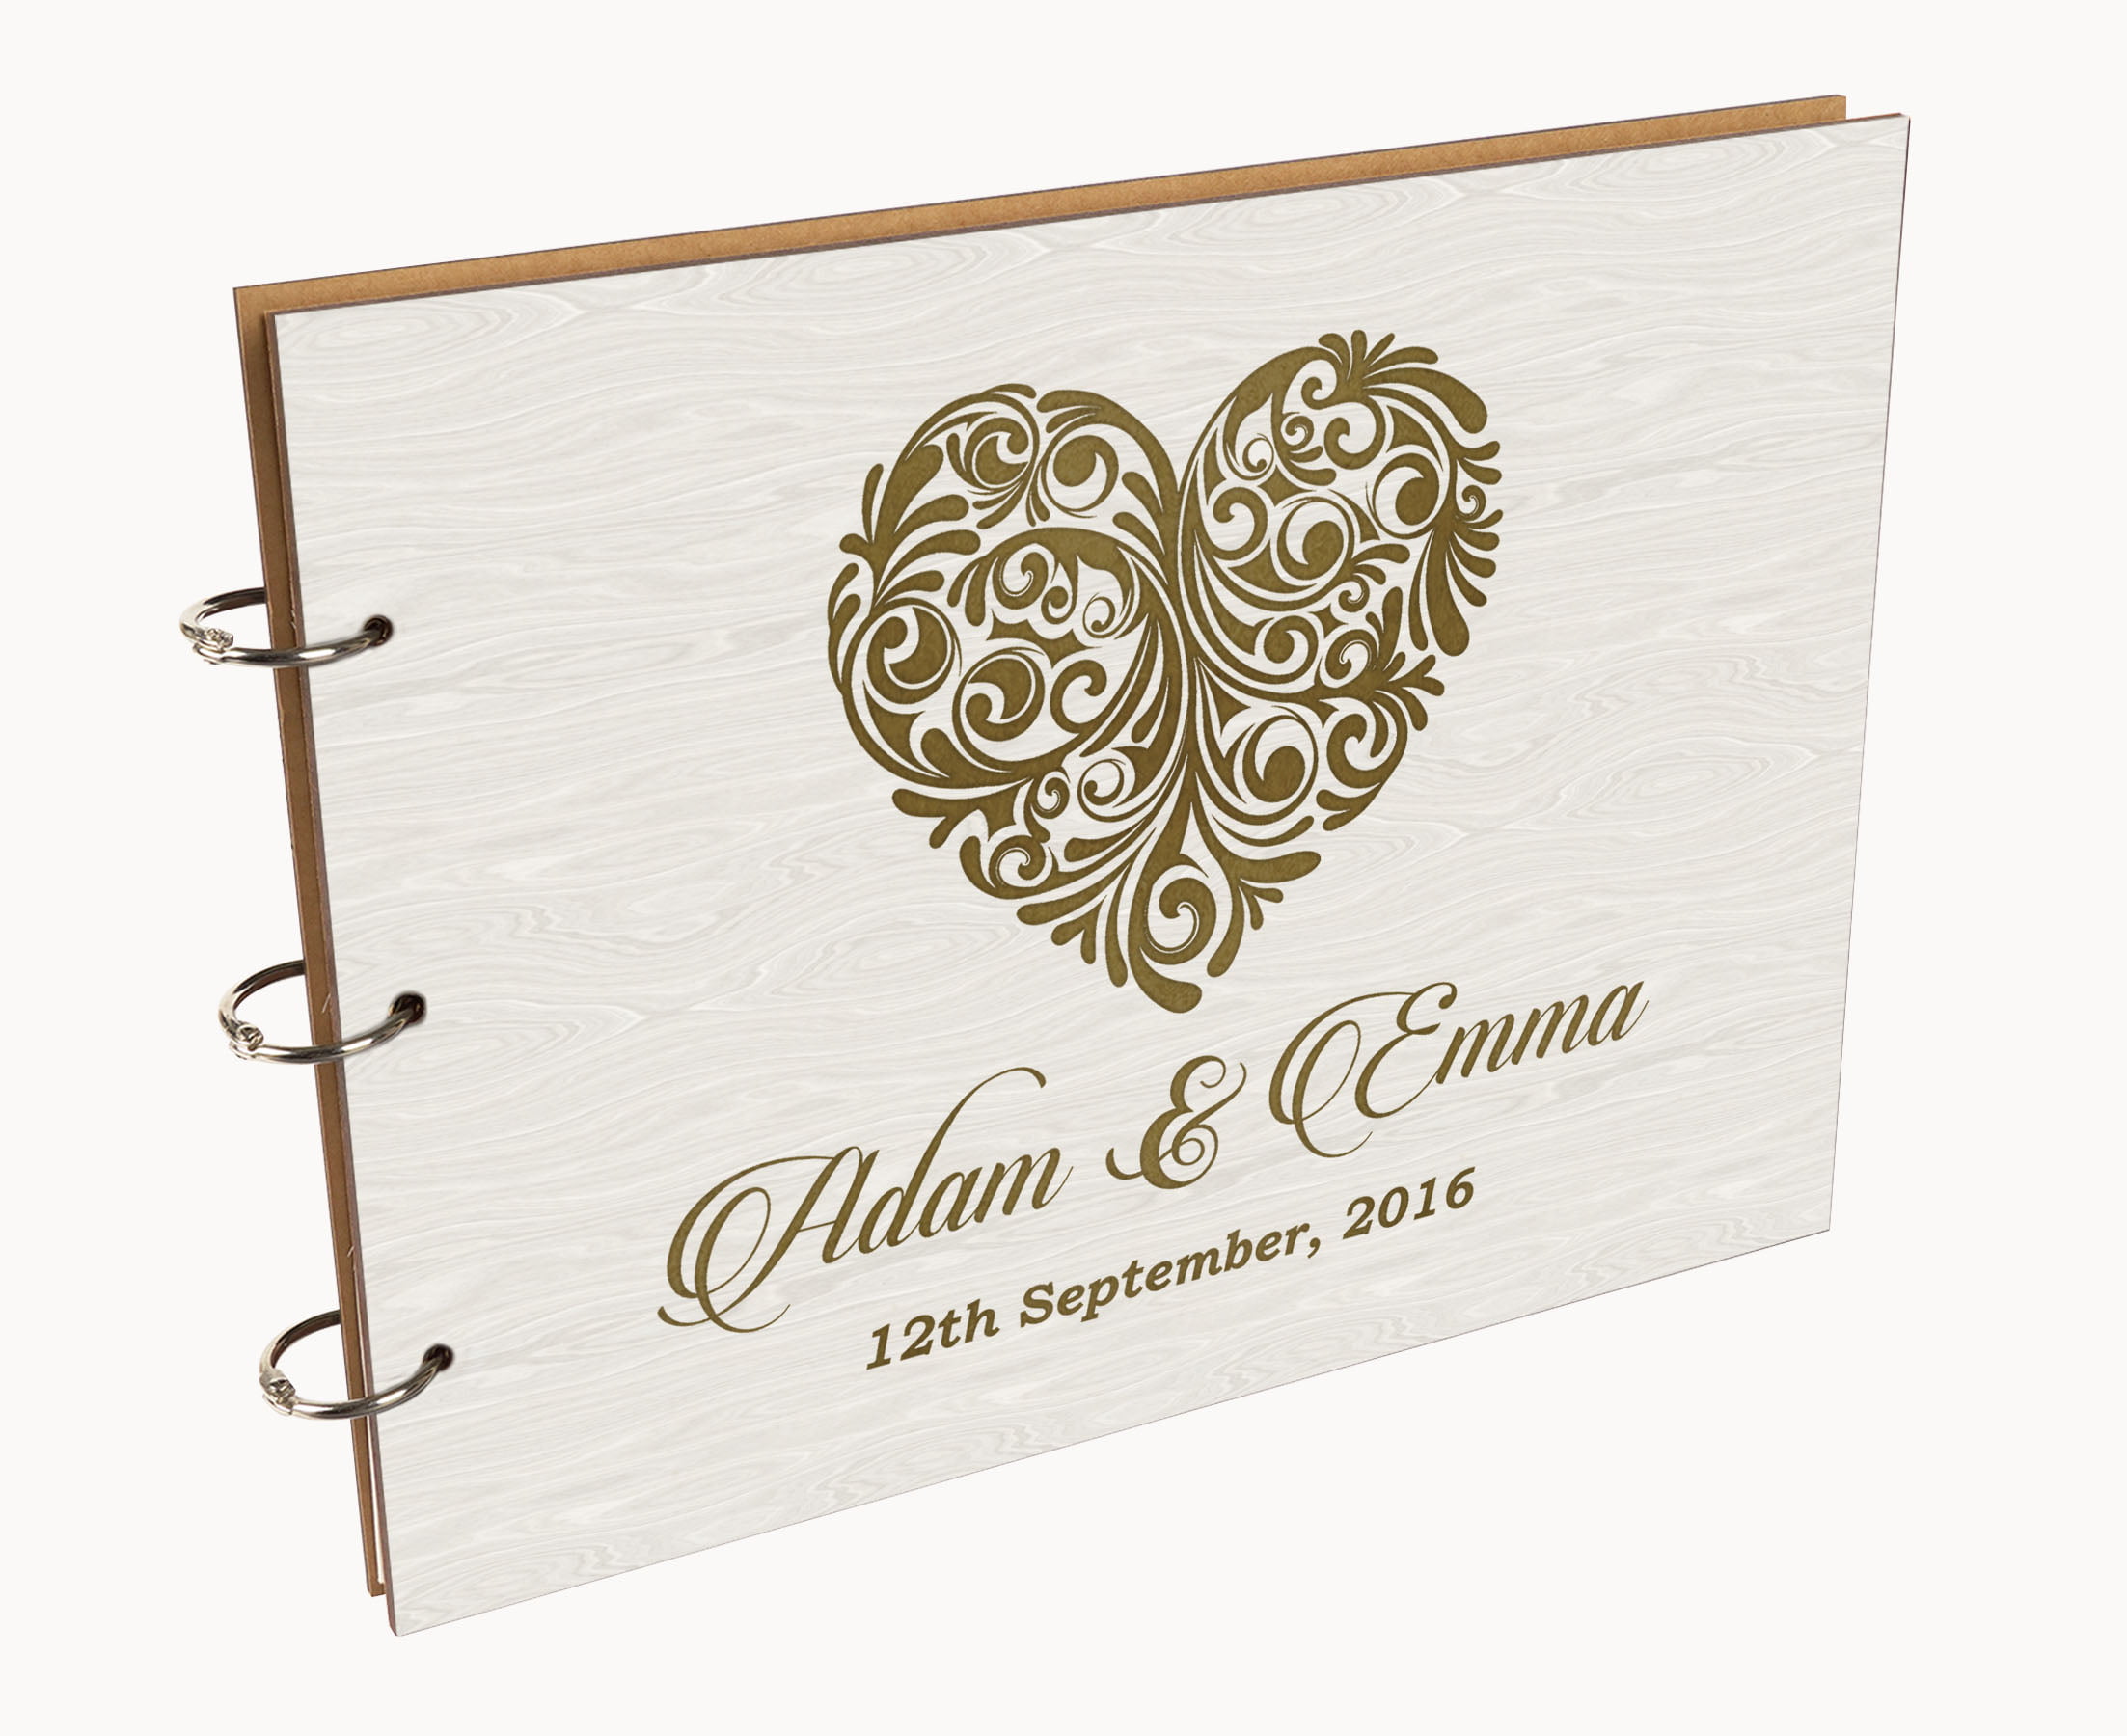 Personalized Engraved Letter Tree Wooden Wedding guest book album,Valentine gift 